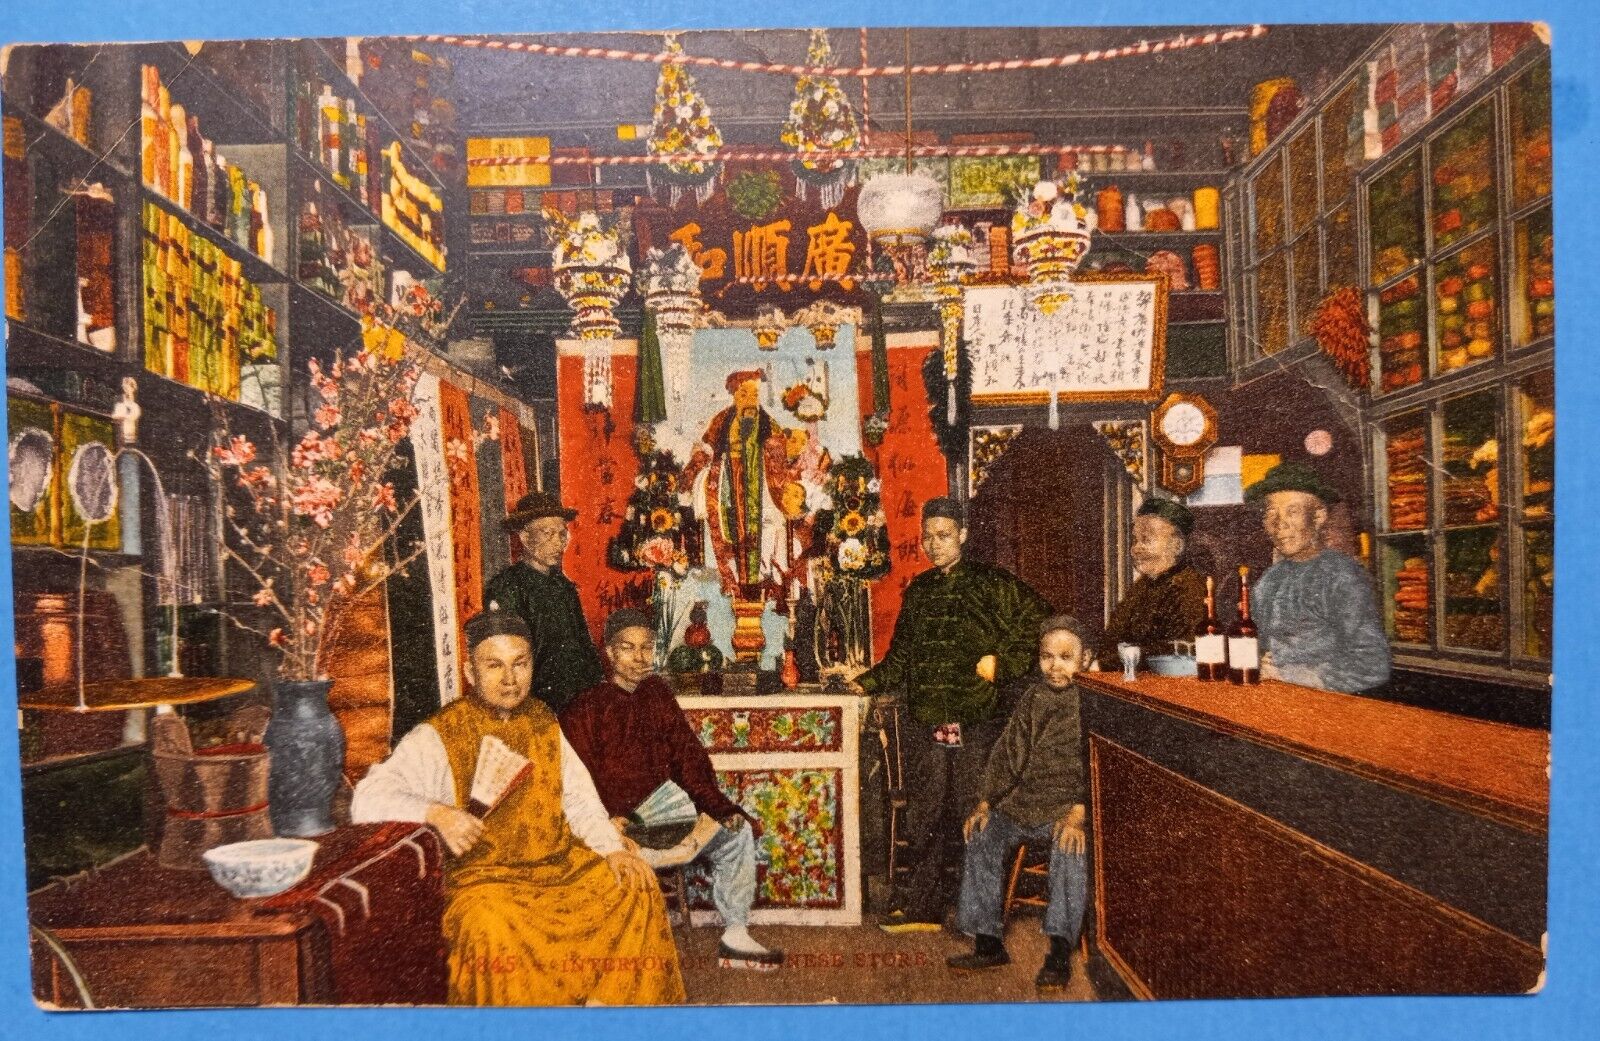 California Chinatown San Francisco Interior of a Chinese Store Anique Postcard